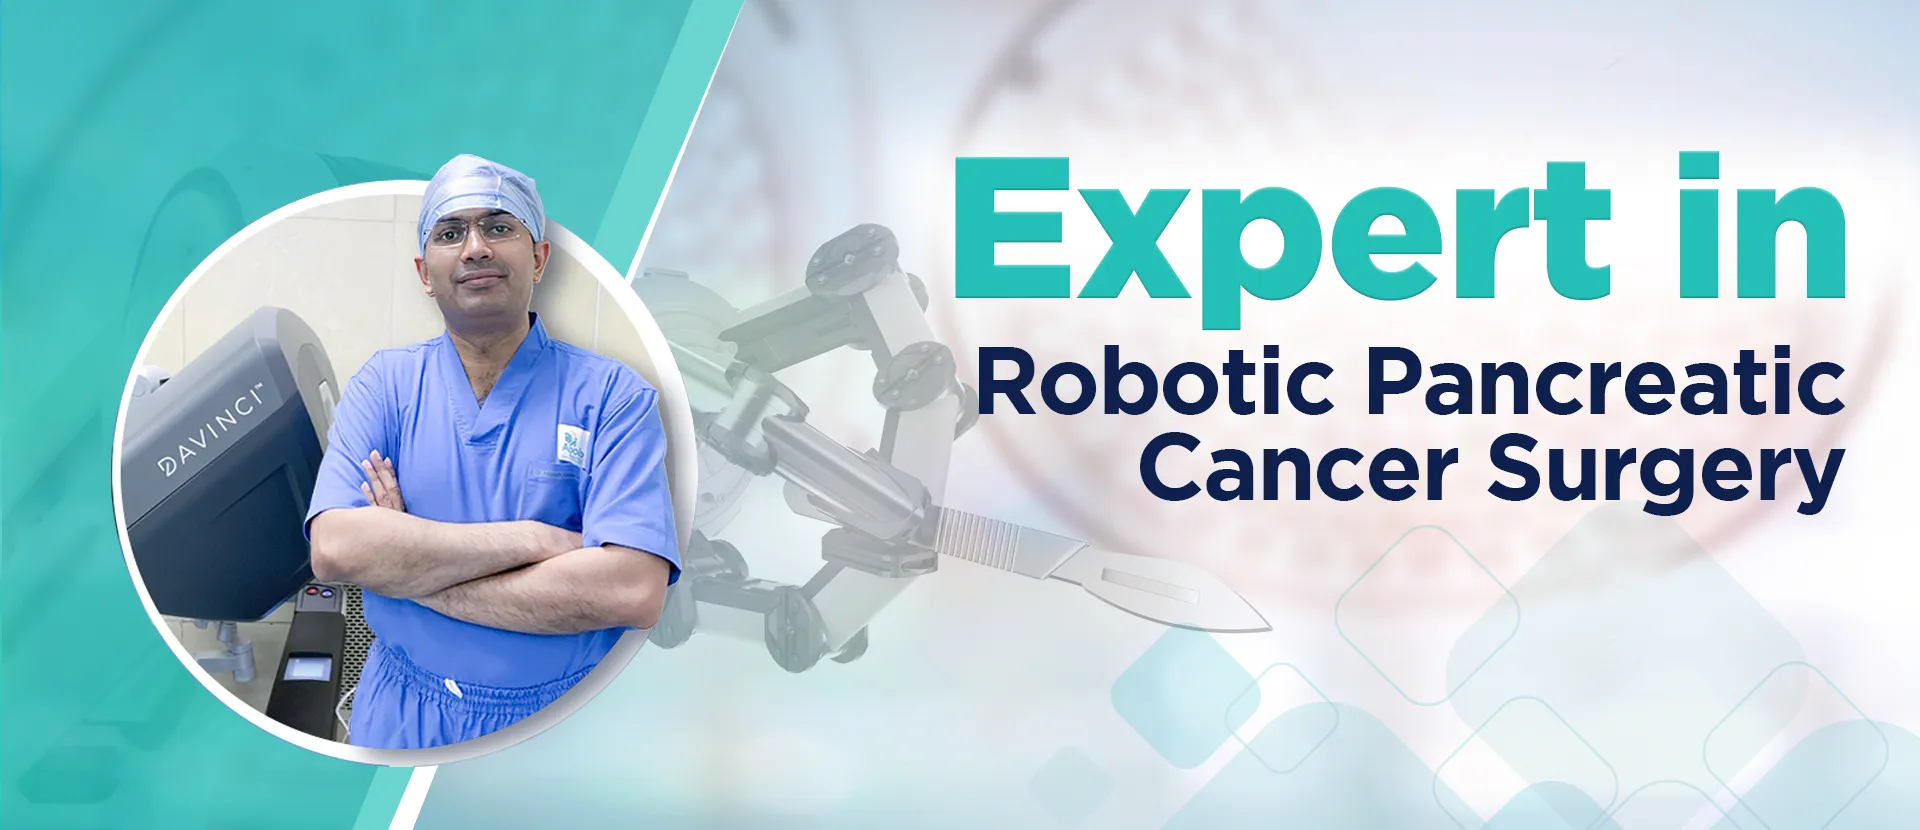 Best robotic pancreatic cancer surgery in ahmedabad